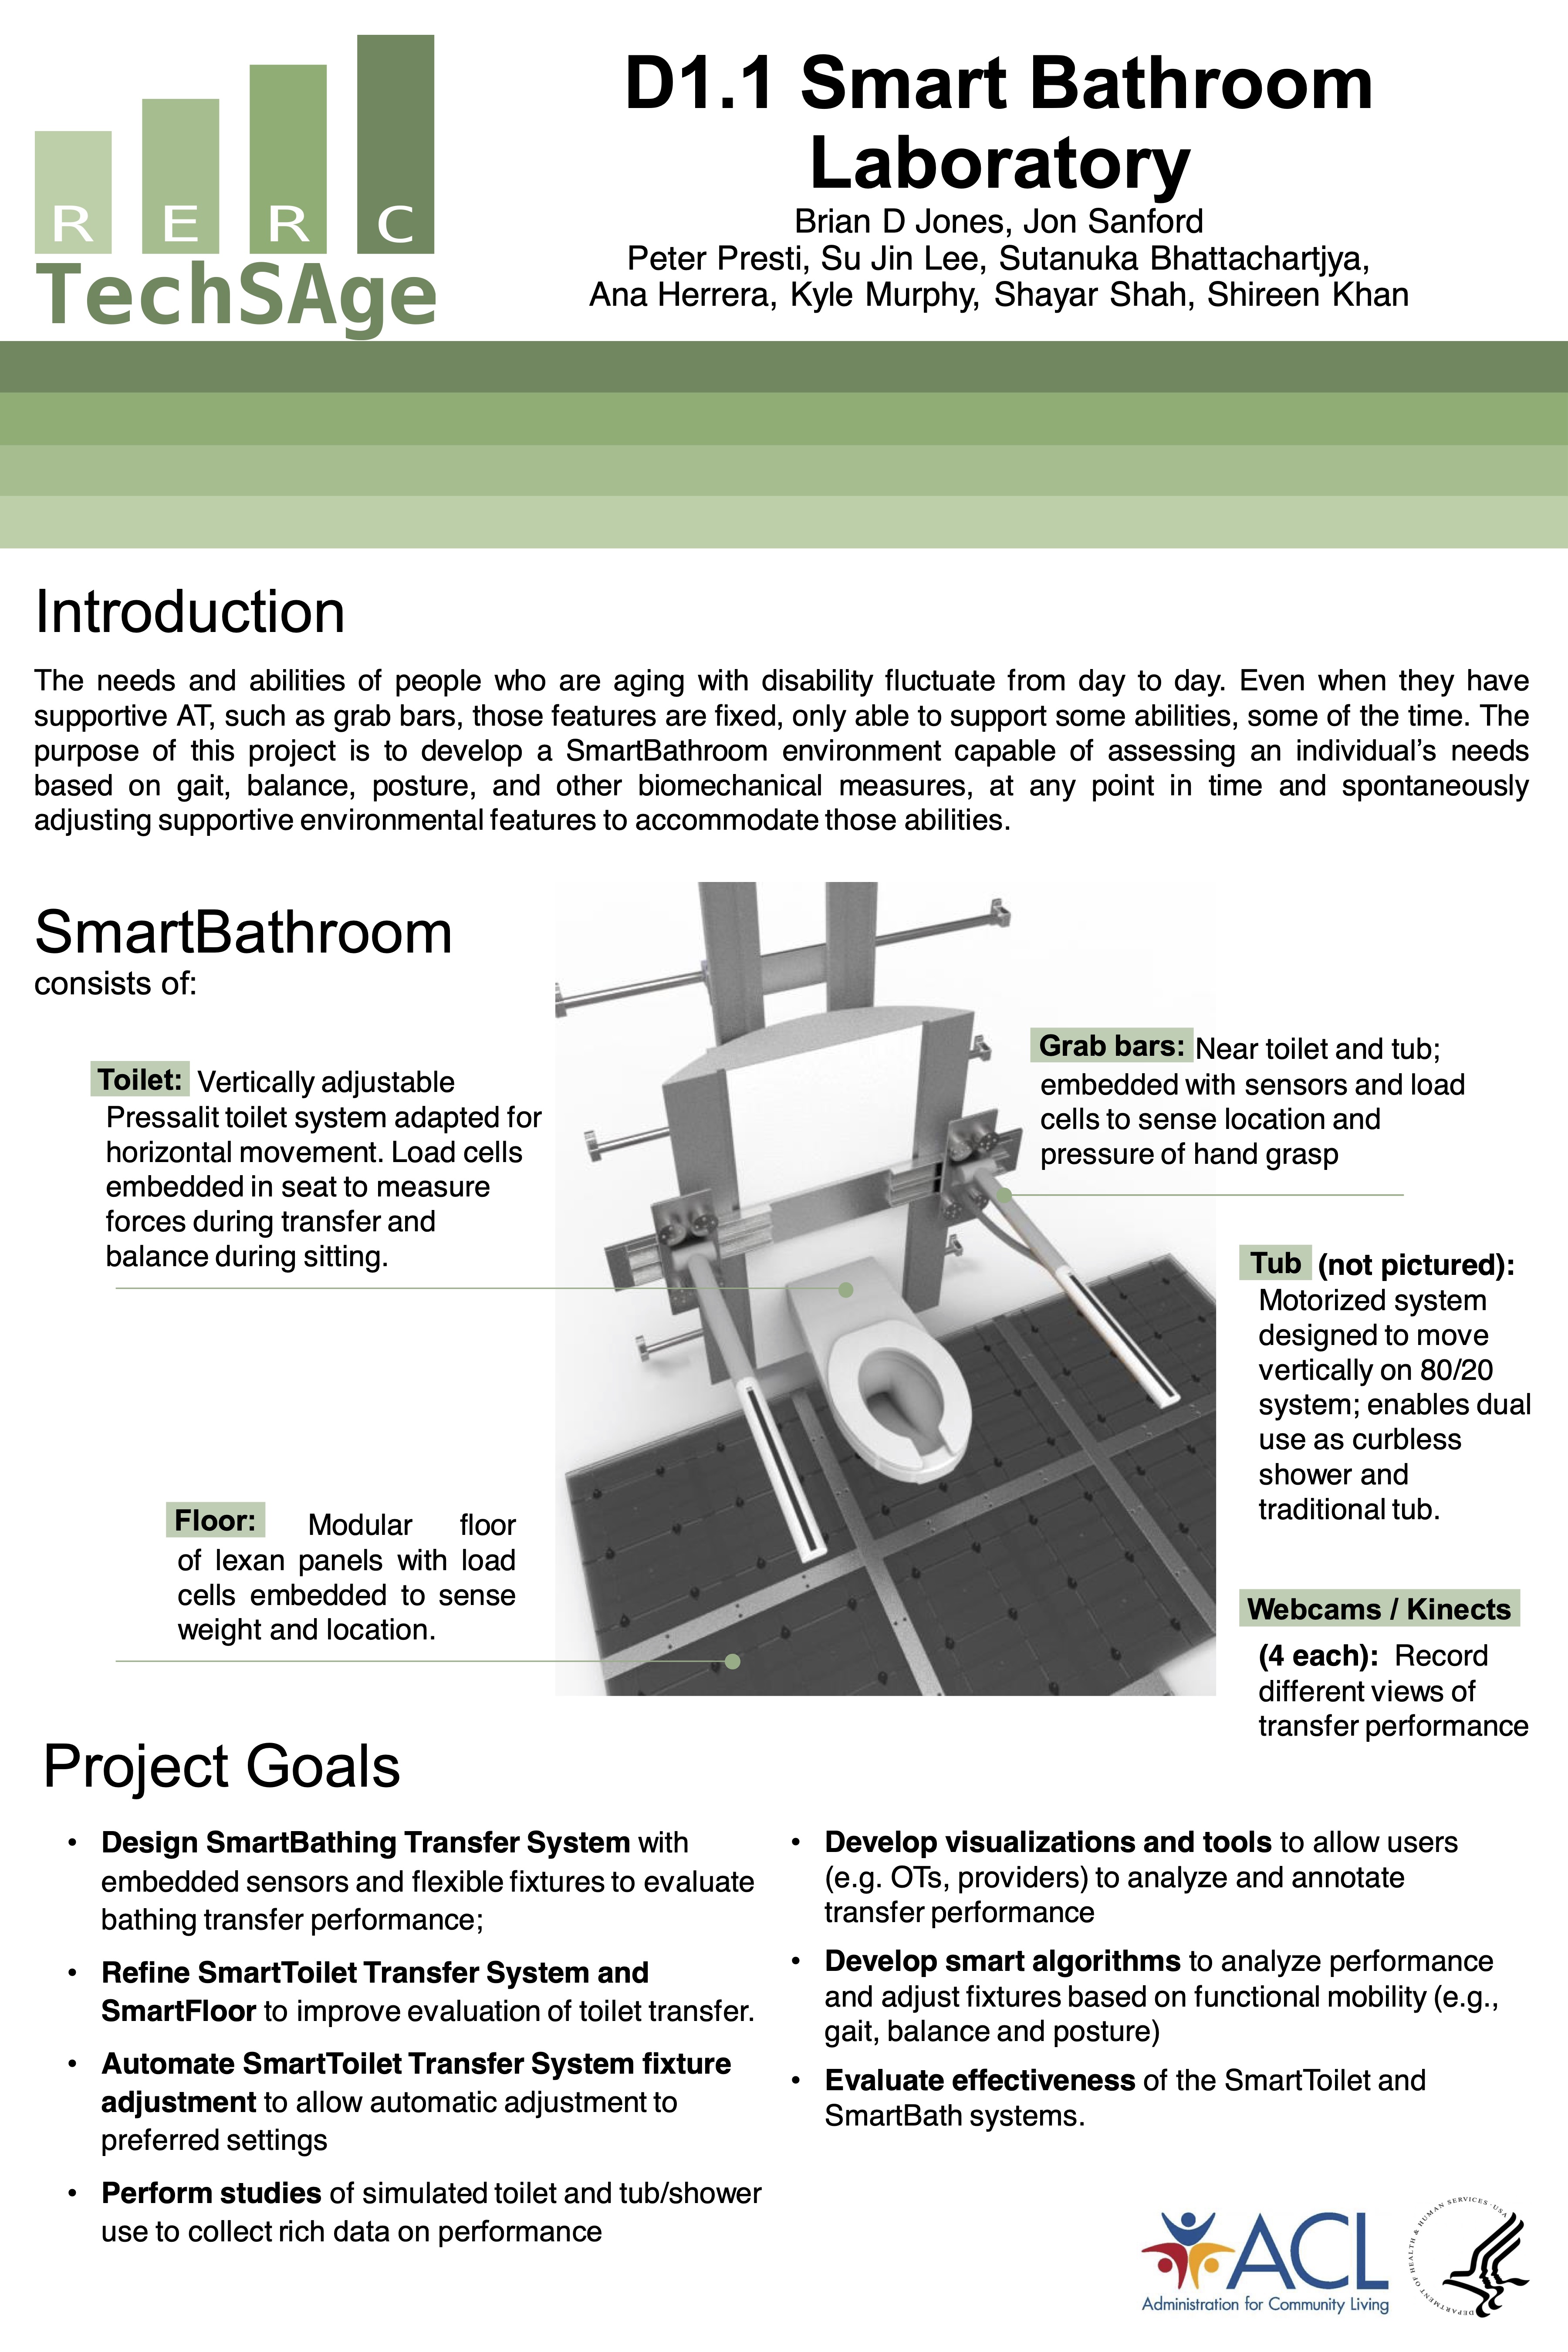 front of the poster providing an overview of the SmartBathroom project work to-date